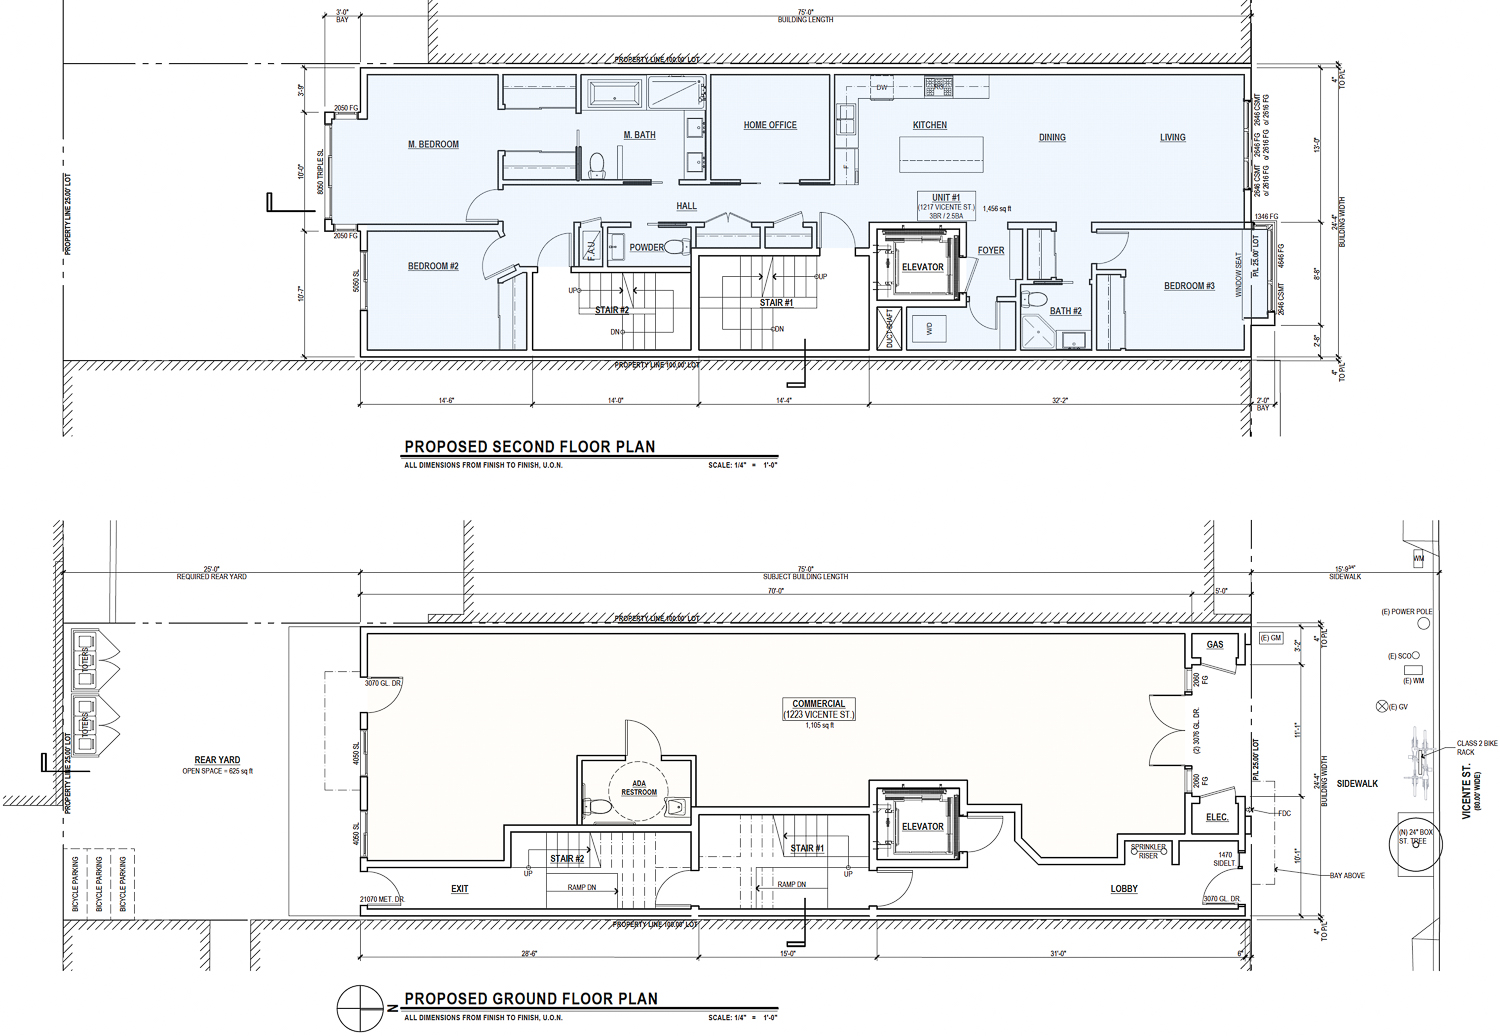 1221 Vicente Street first and second level floor plans, illustration by My My Ly Architects